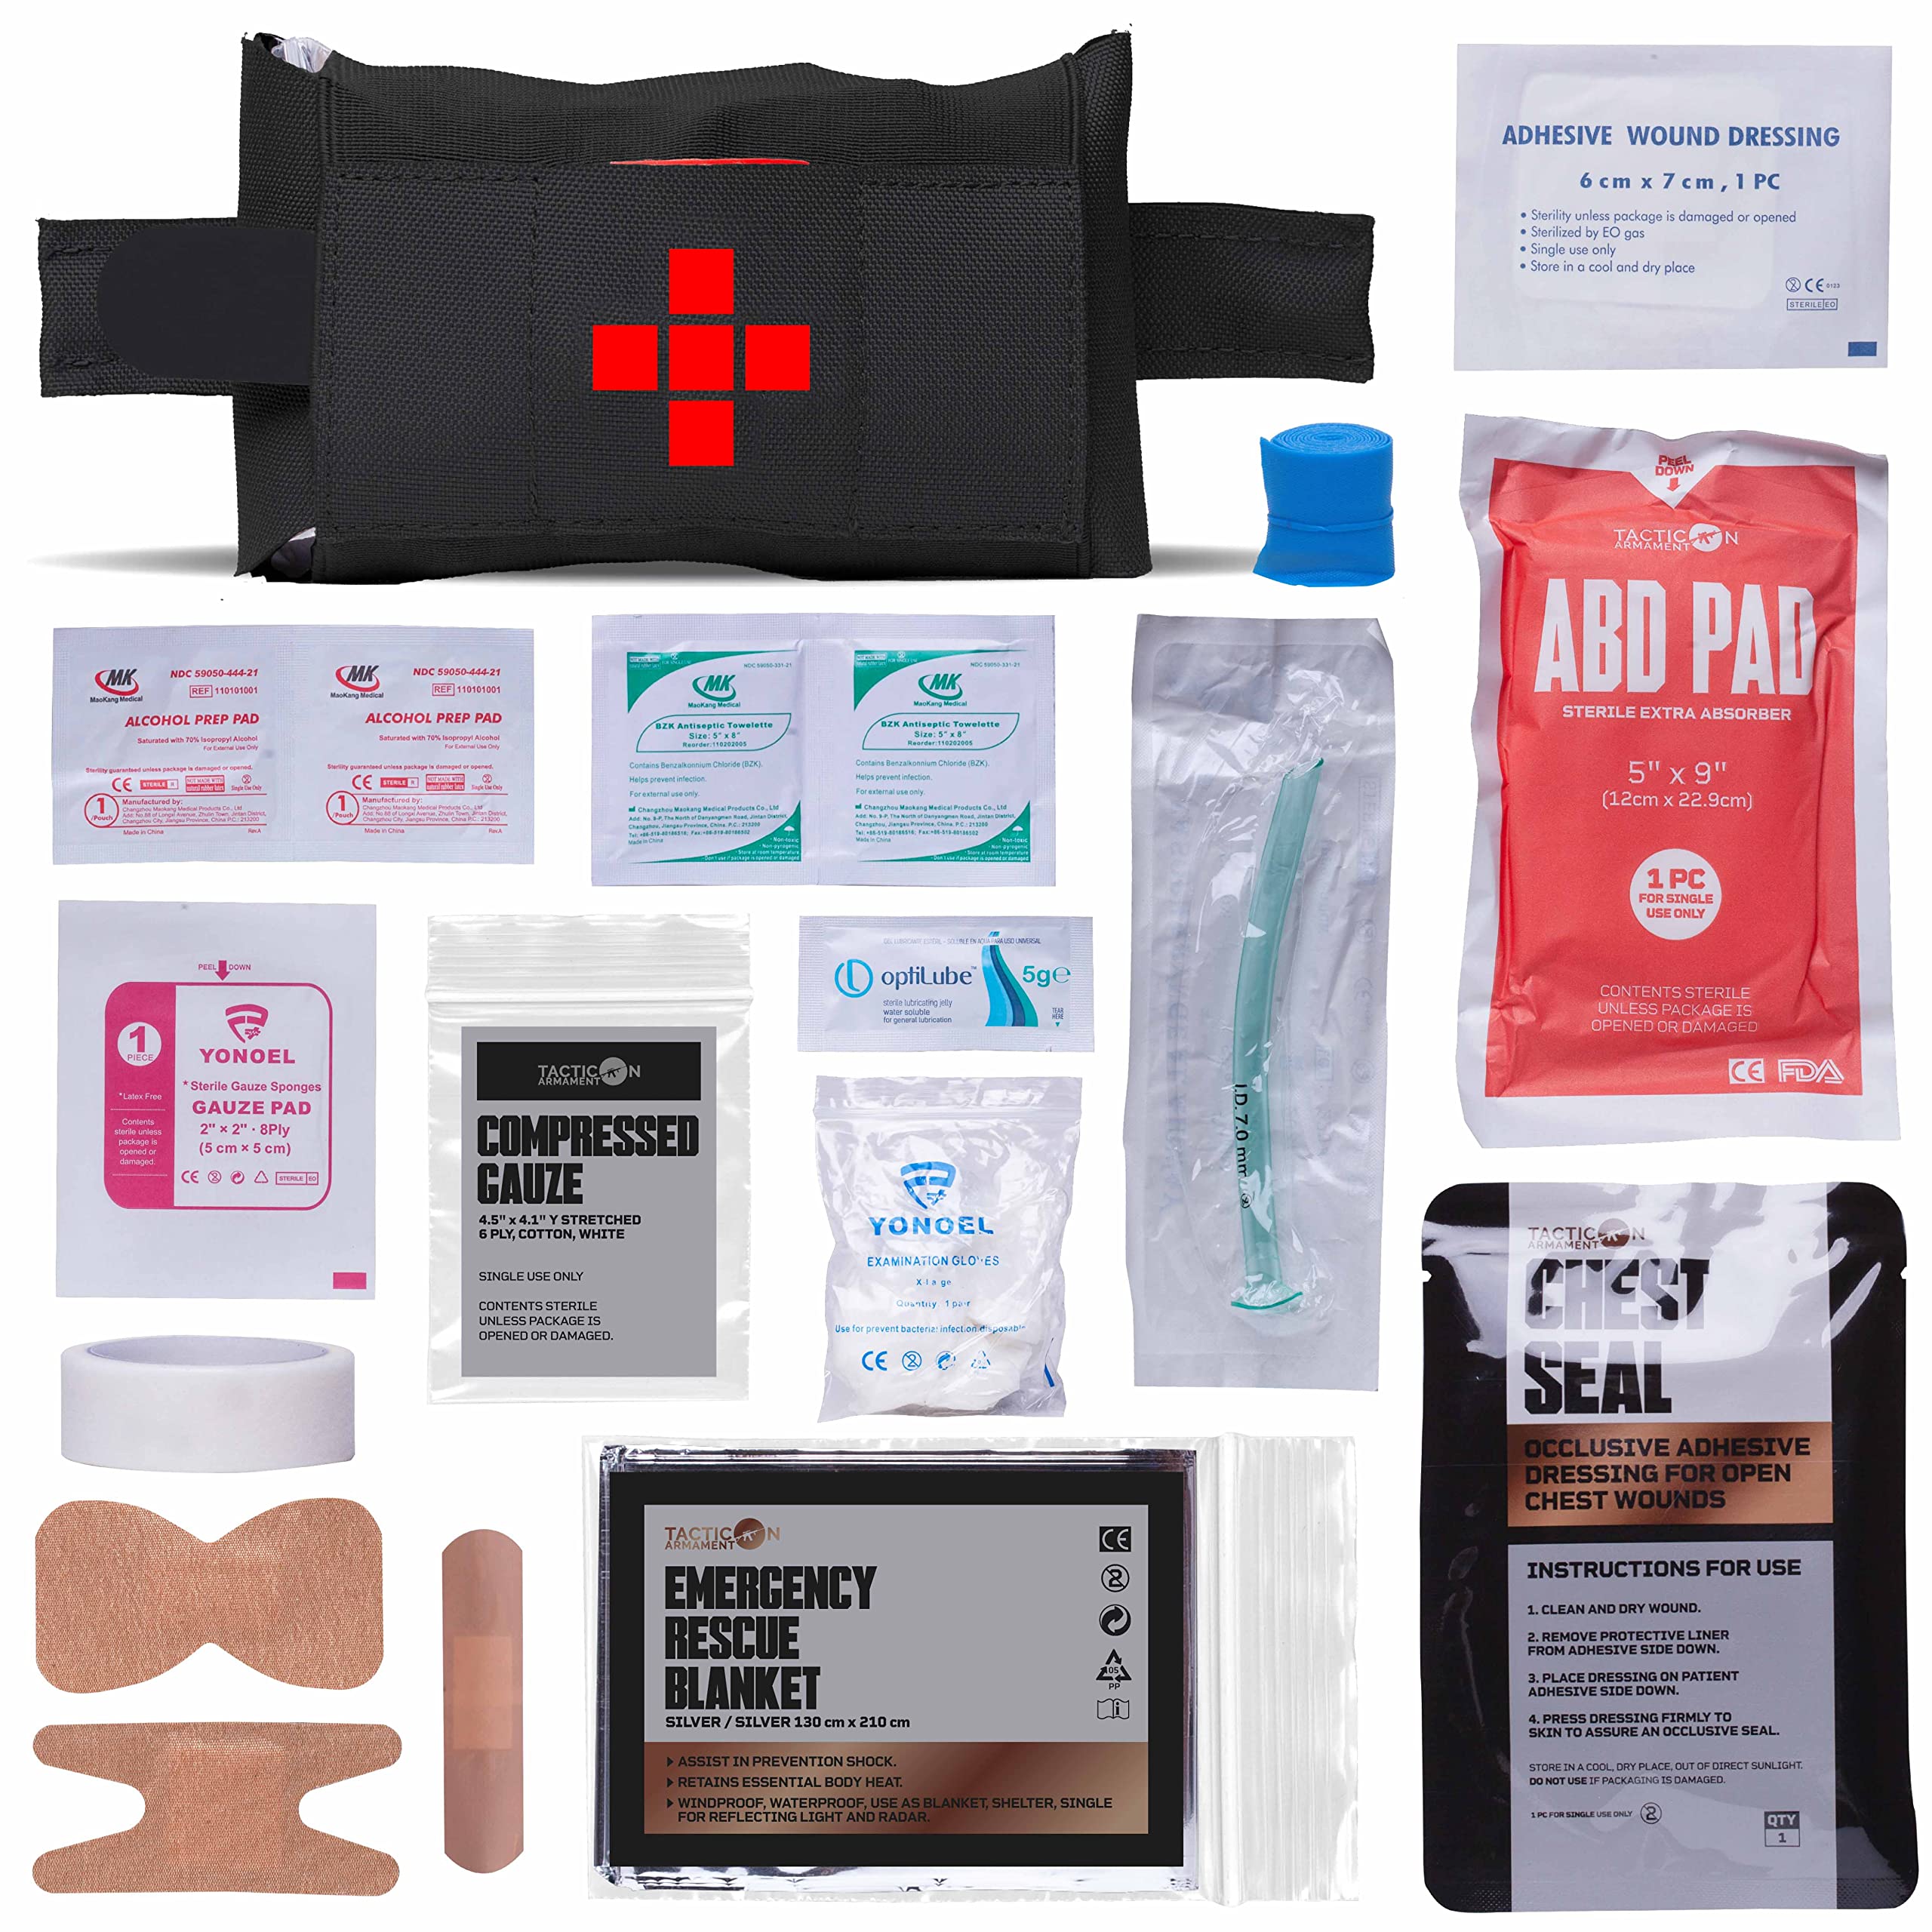  Small Compact IFAK Med Trauma Kit for Everyday Carry